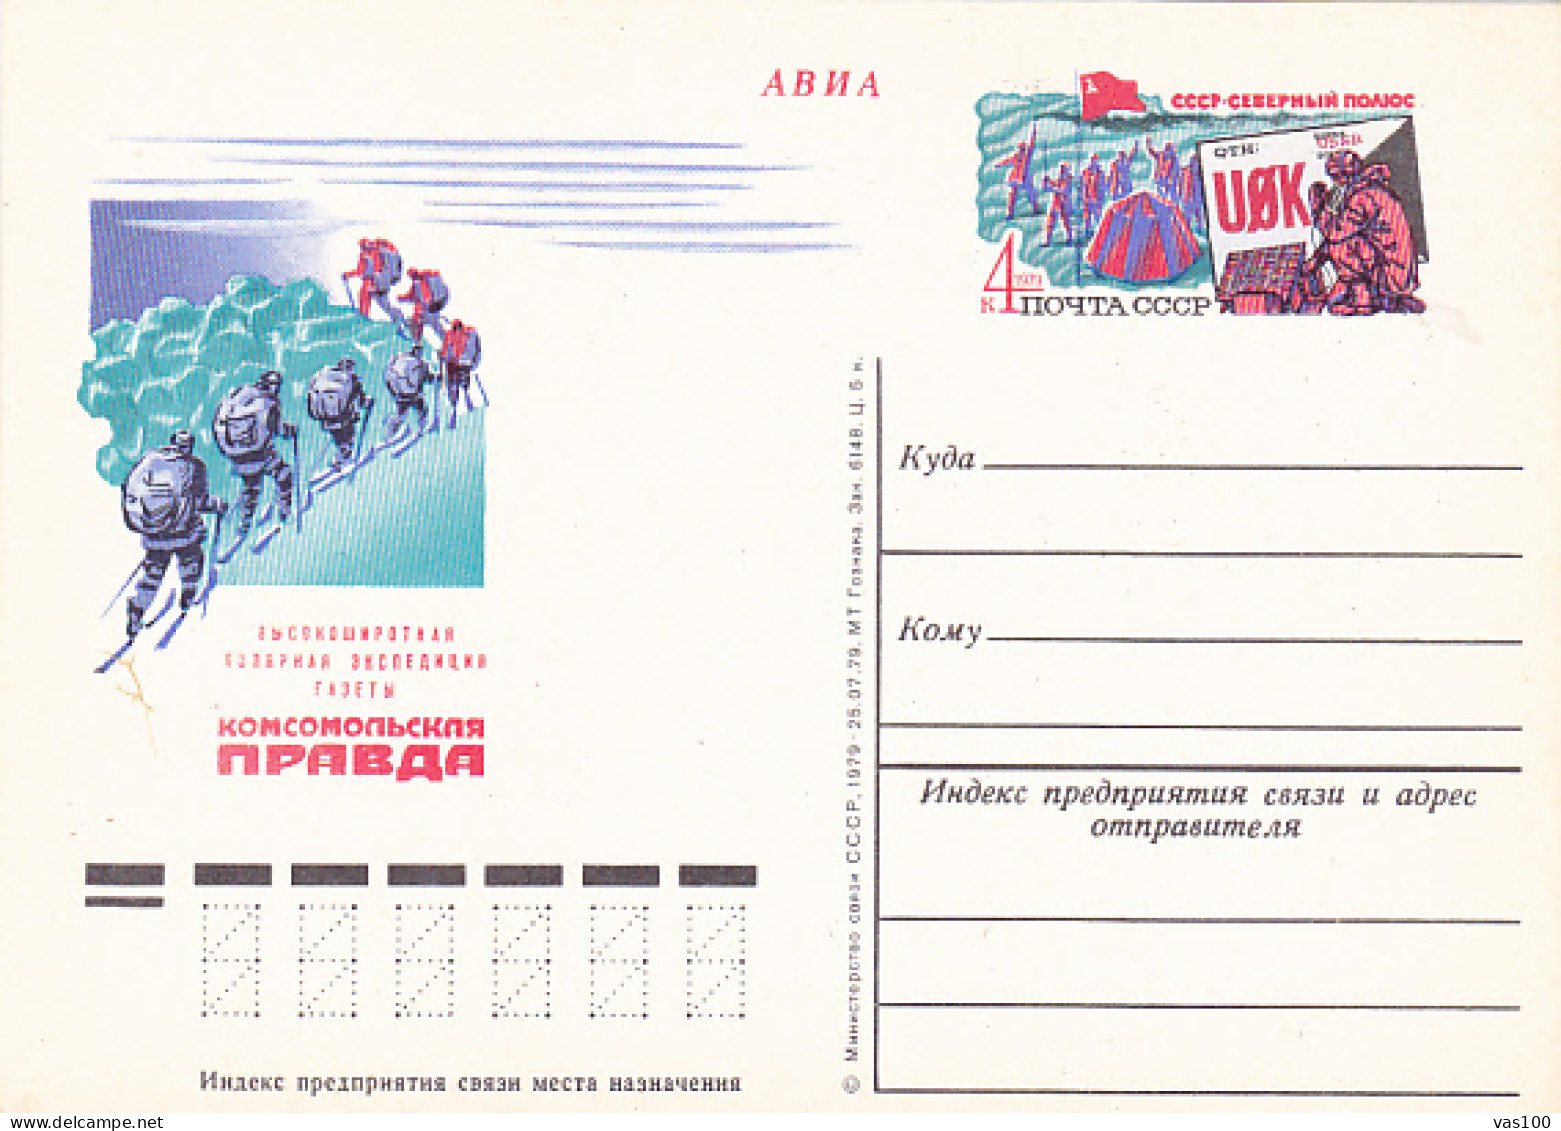 NORTH POLE, PRAVDA NEWSPAPER RUSSIAN ARCTIC EXPEDITION, PC STATIONERY, ENTIER POSTAL, 1979, RUSSIA - Arctische Expedities